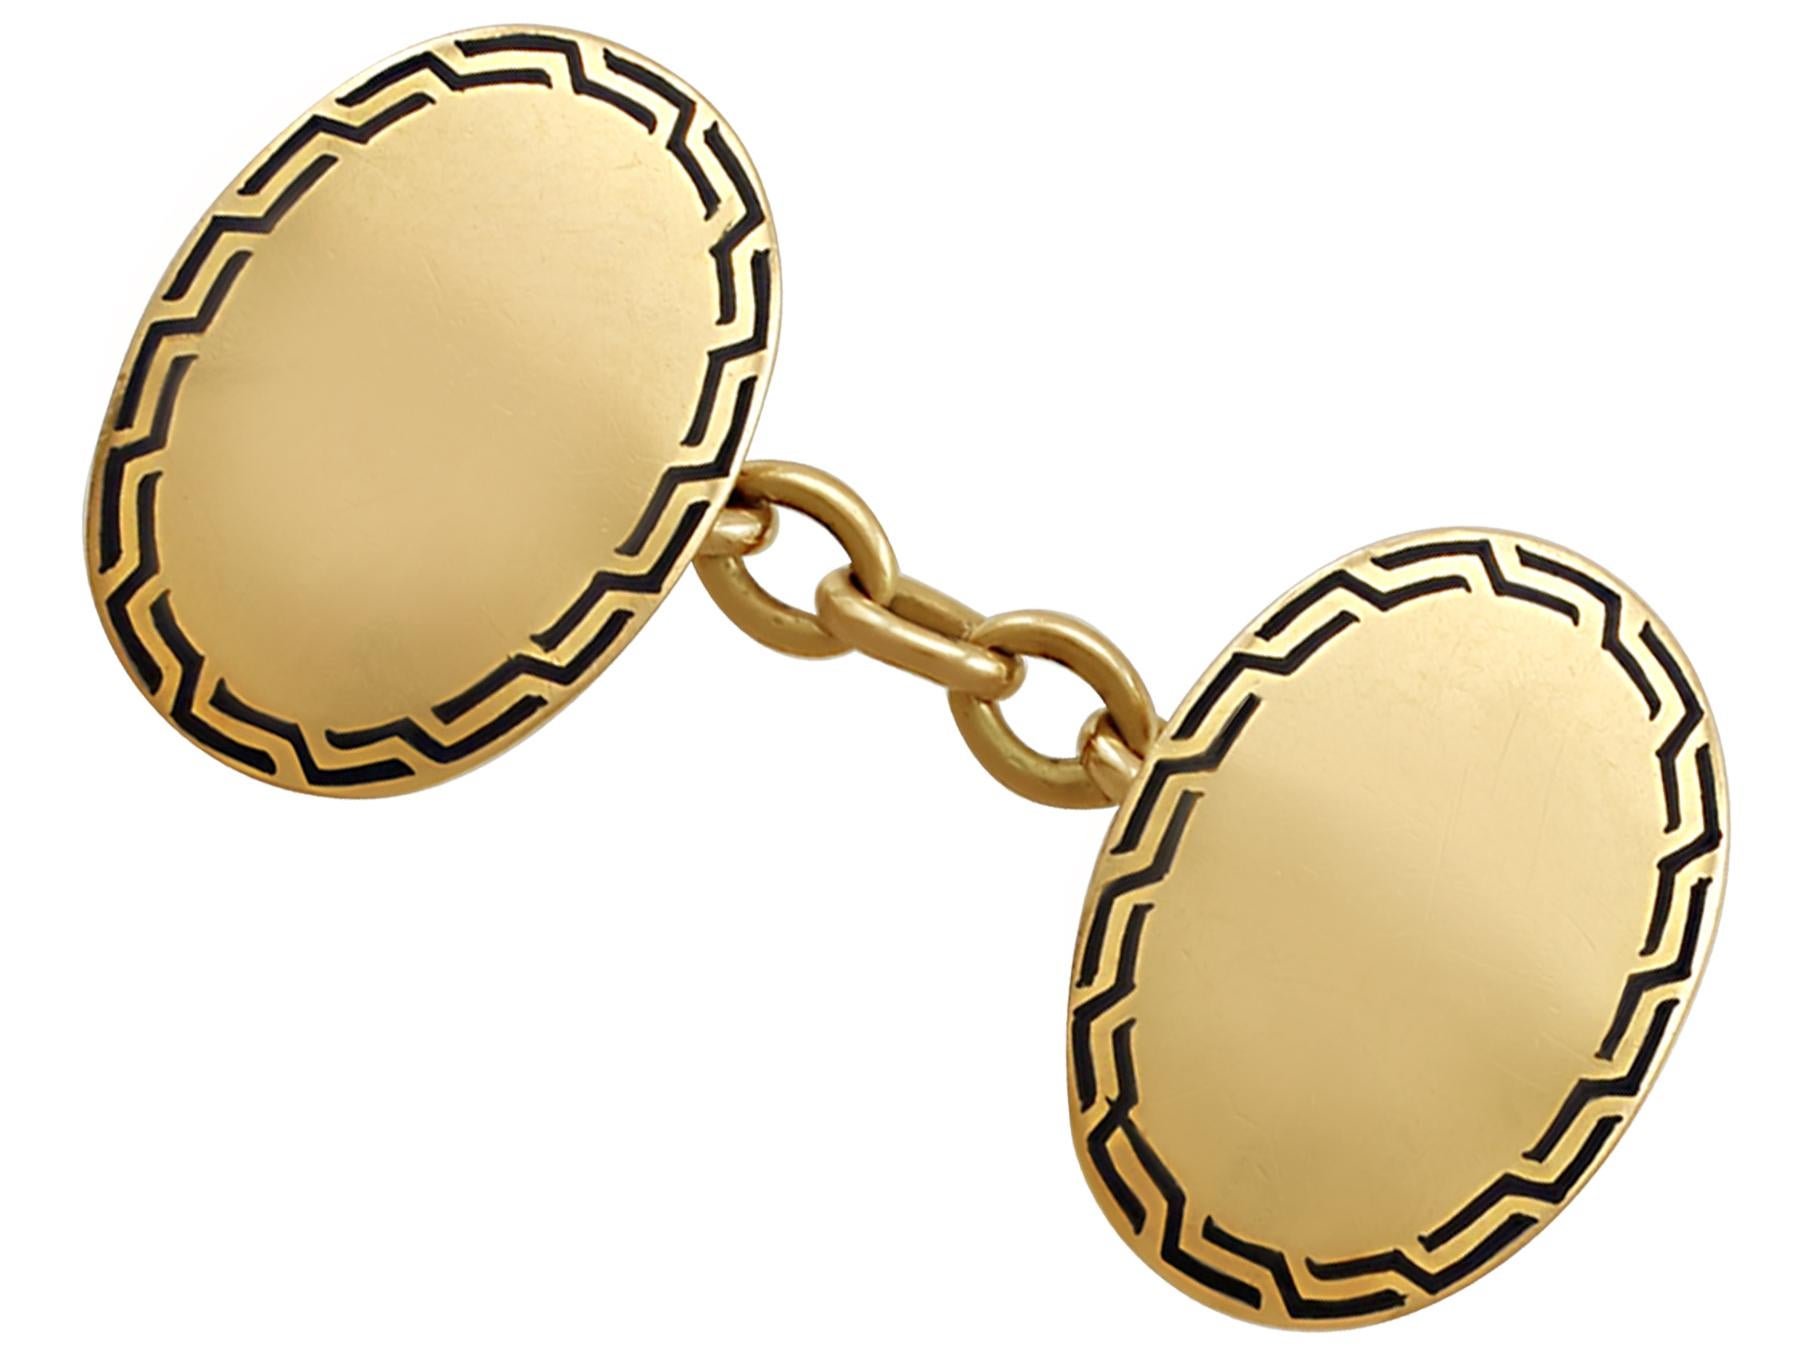 A fine and impressive pair of antique enamel and 15 karat yellow gold cufflinks; an addition to our men's jewelry and estate jewelry collections.

These antique cufflinks have been crafted in 15k yellow gold.

The cufflinks have an oval form.

The